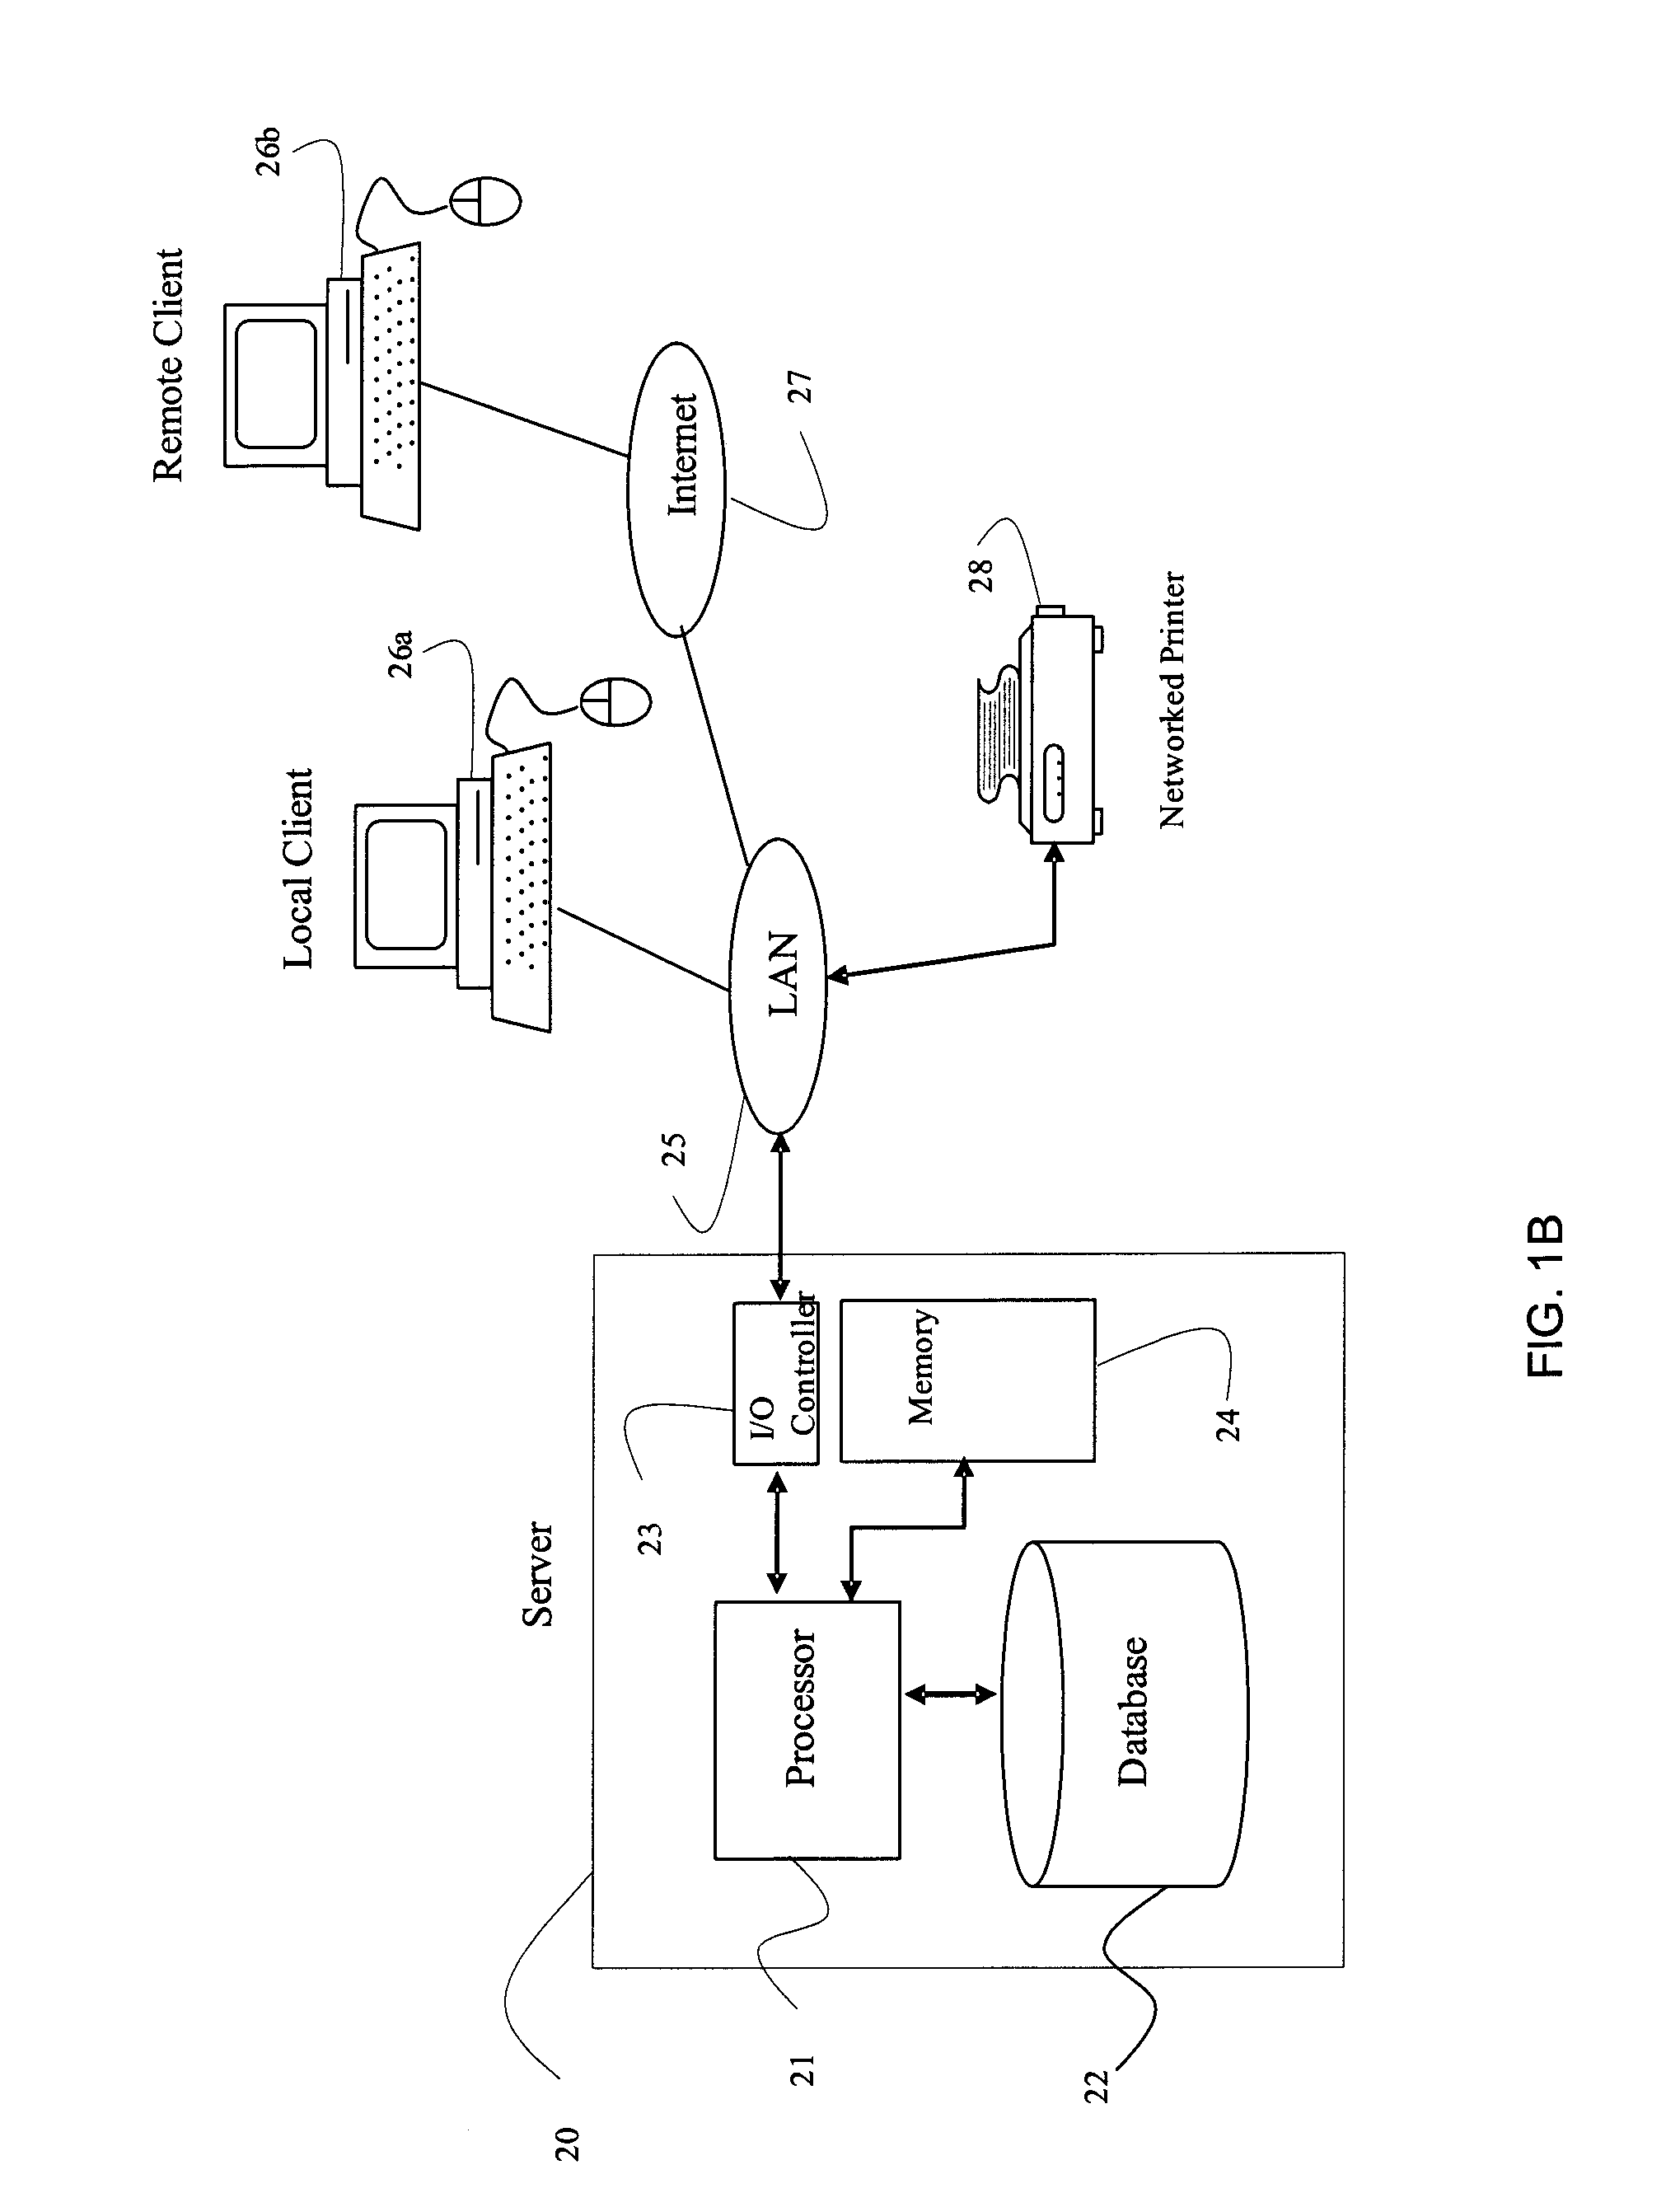 Identity-based conferencing systems and methods